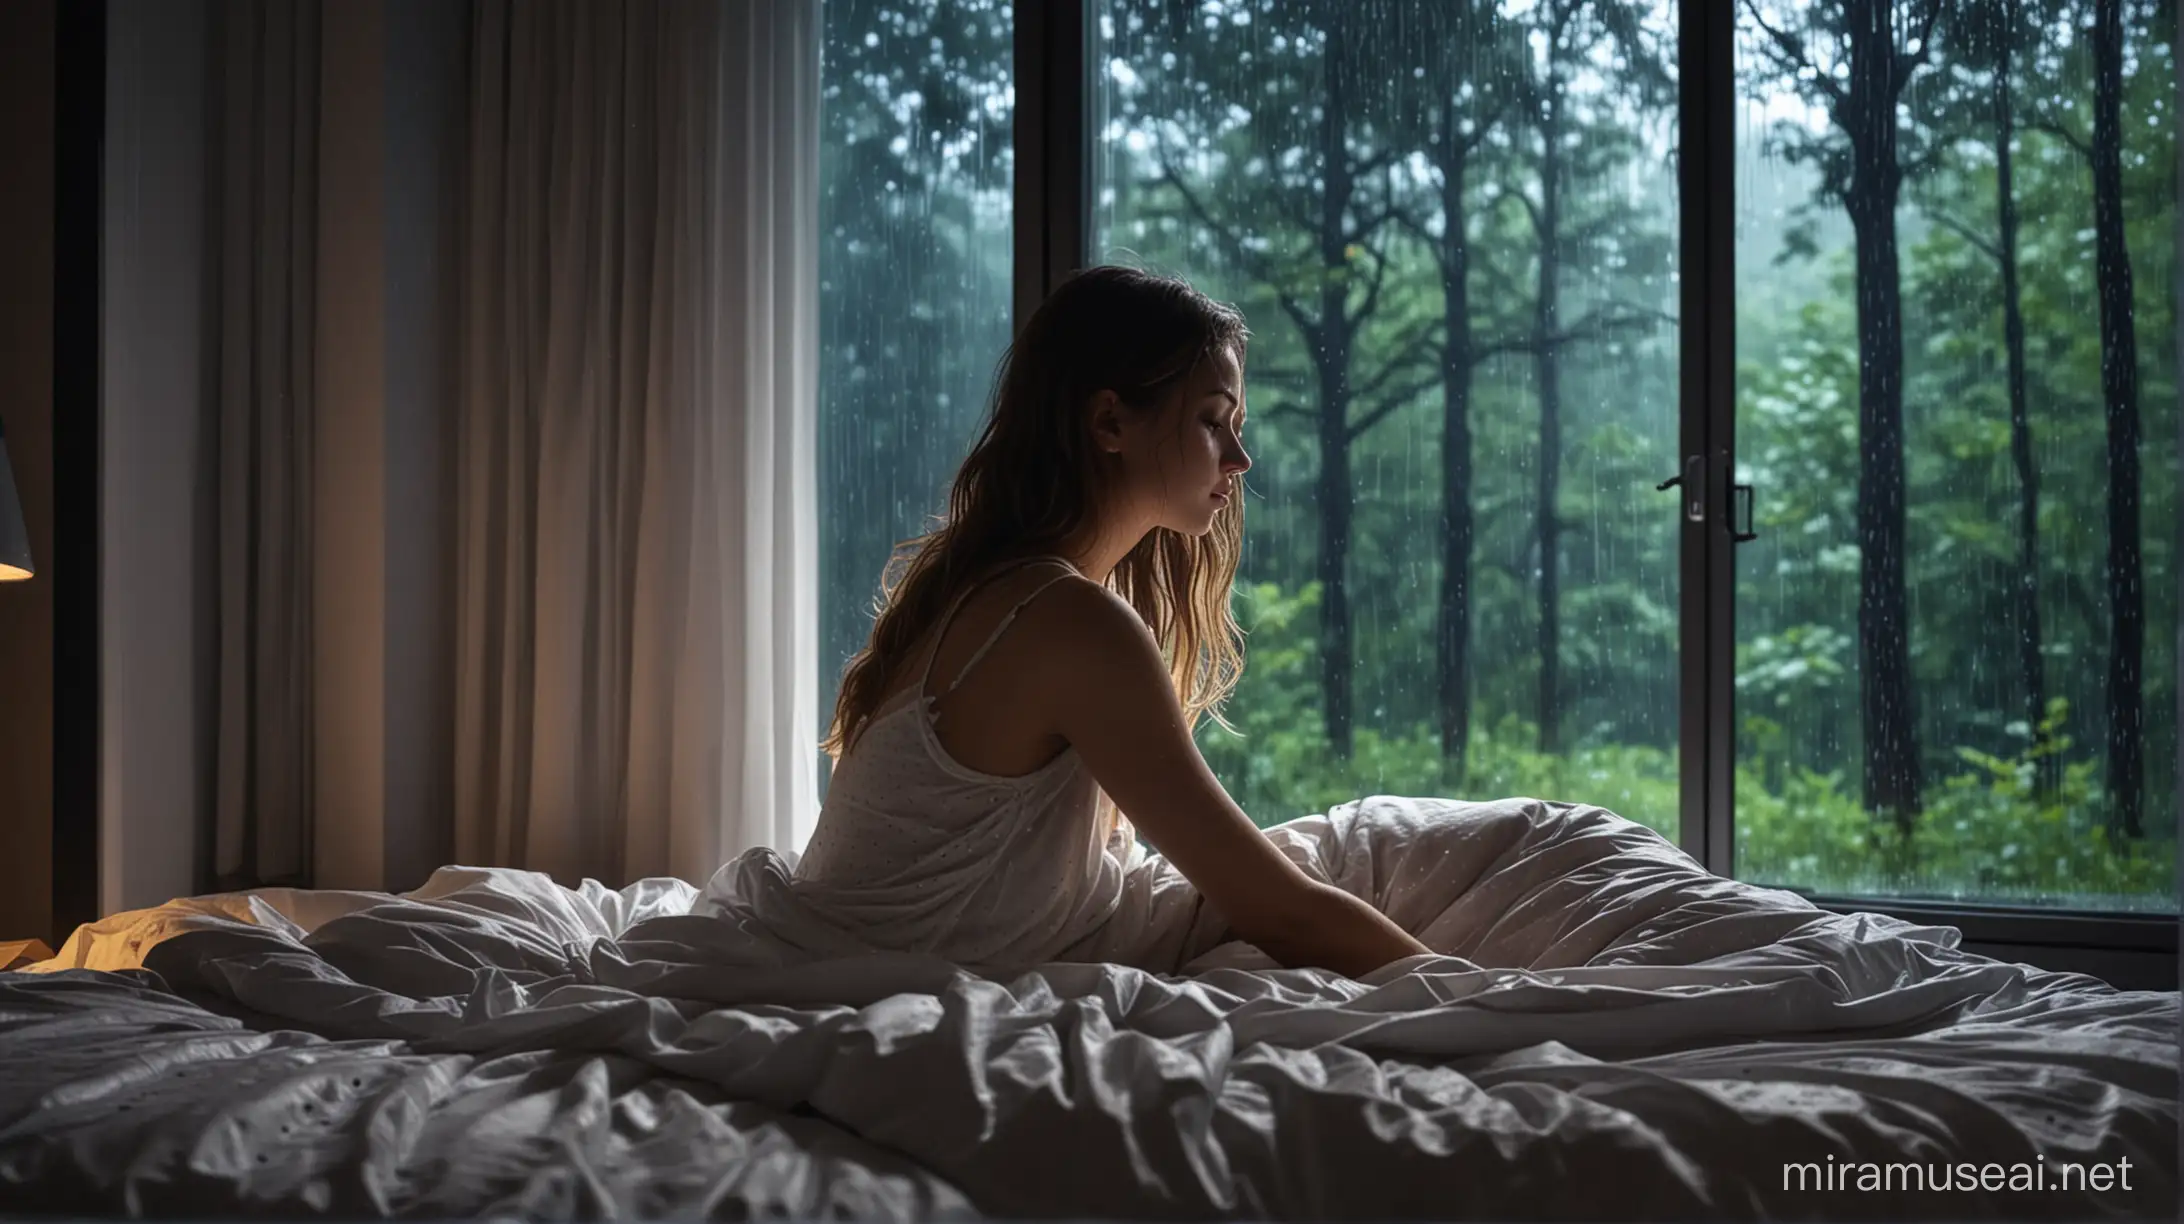 beautiful girl sleep in the bedroom at night with the bedroom window showing a rainy atmosphere on the edge of the forest